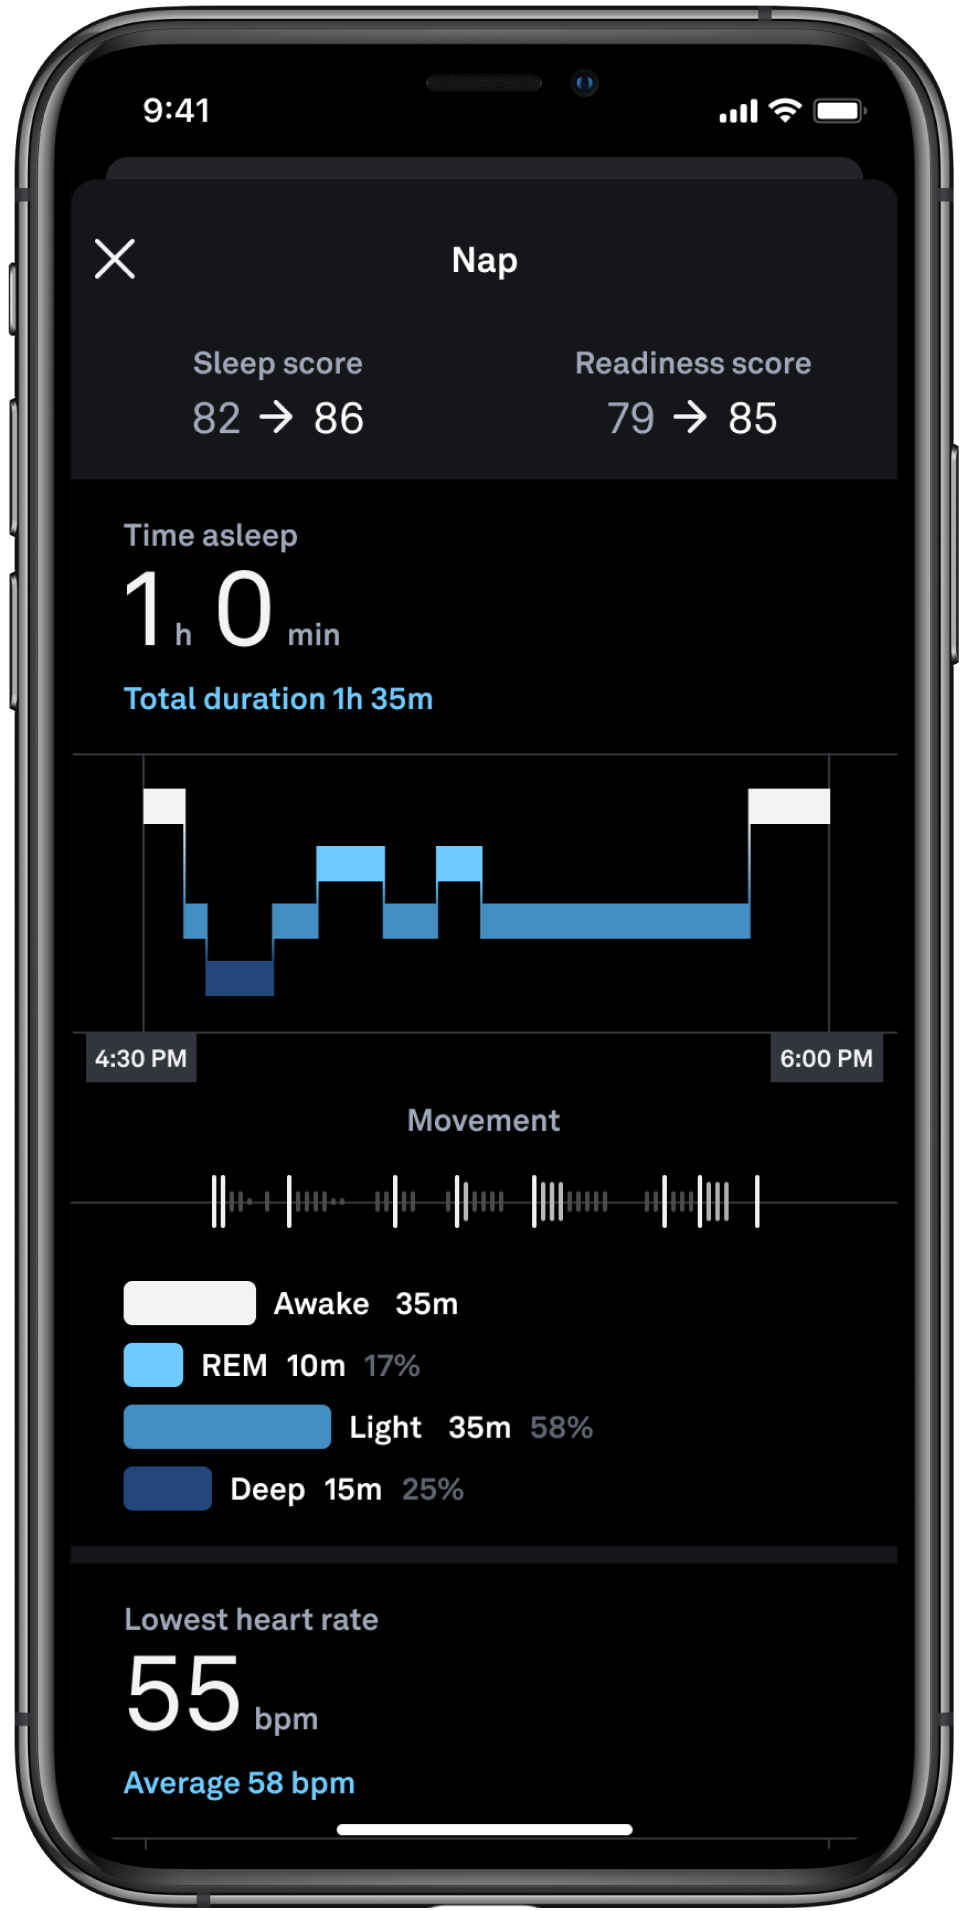 a screen with expanded nap details, including changes in sleep and readiness scores, time spent asleep, a sleep stages graph, a movement chart, and the lowest heart rate during the sleep period